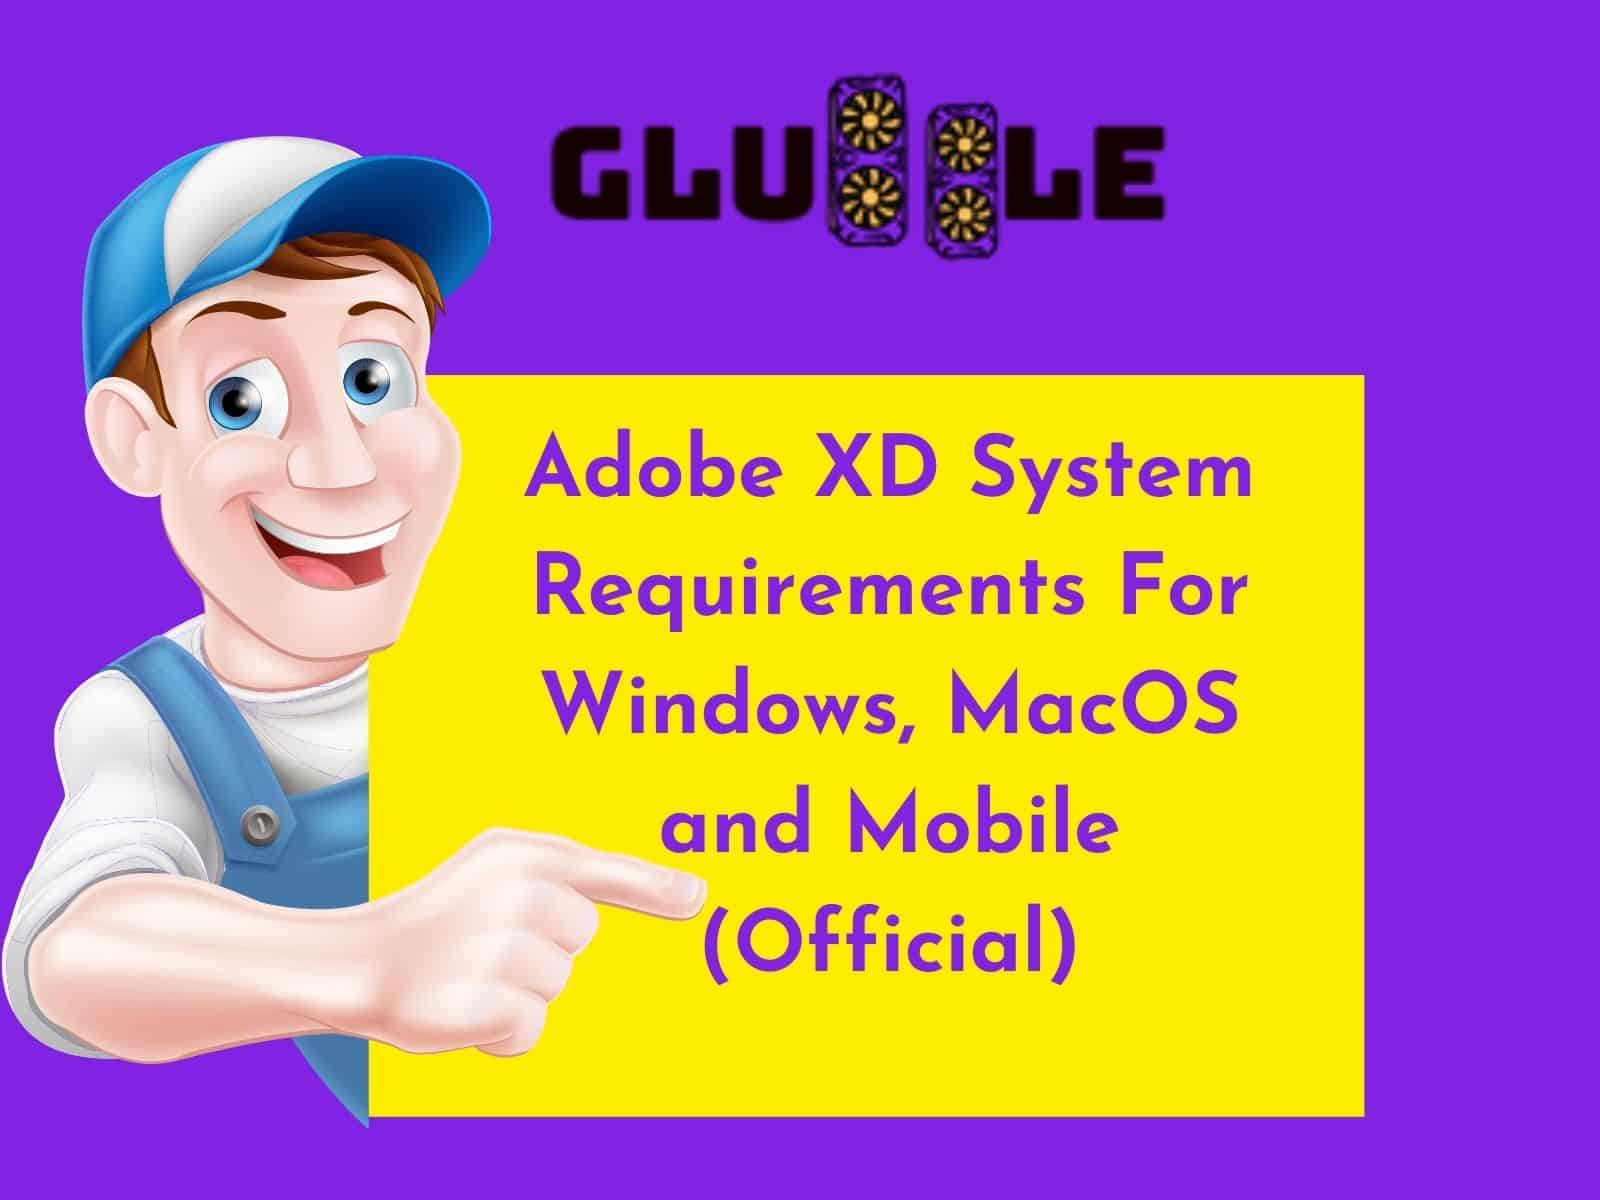 C:\Users\Mohsin\Downloads\Adobe XD System Requirements For Windows, MacOS and Mobile (Official).jpg